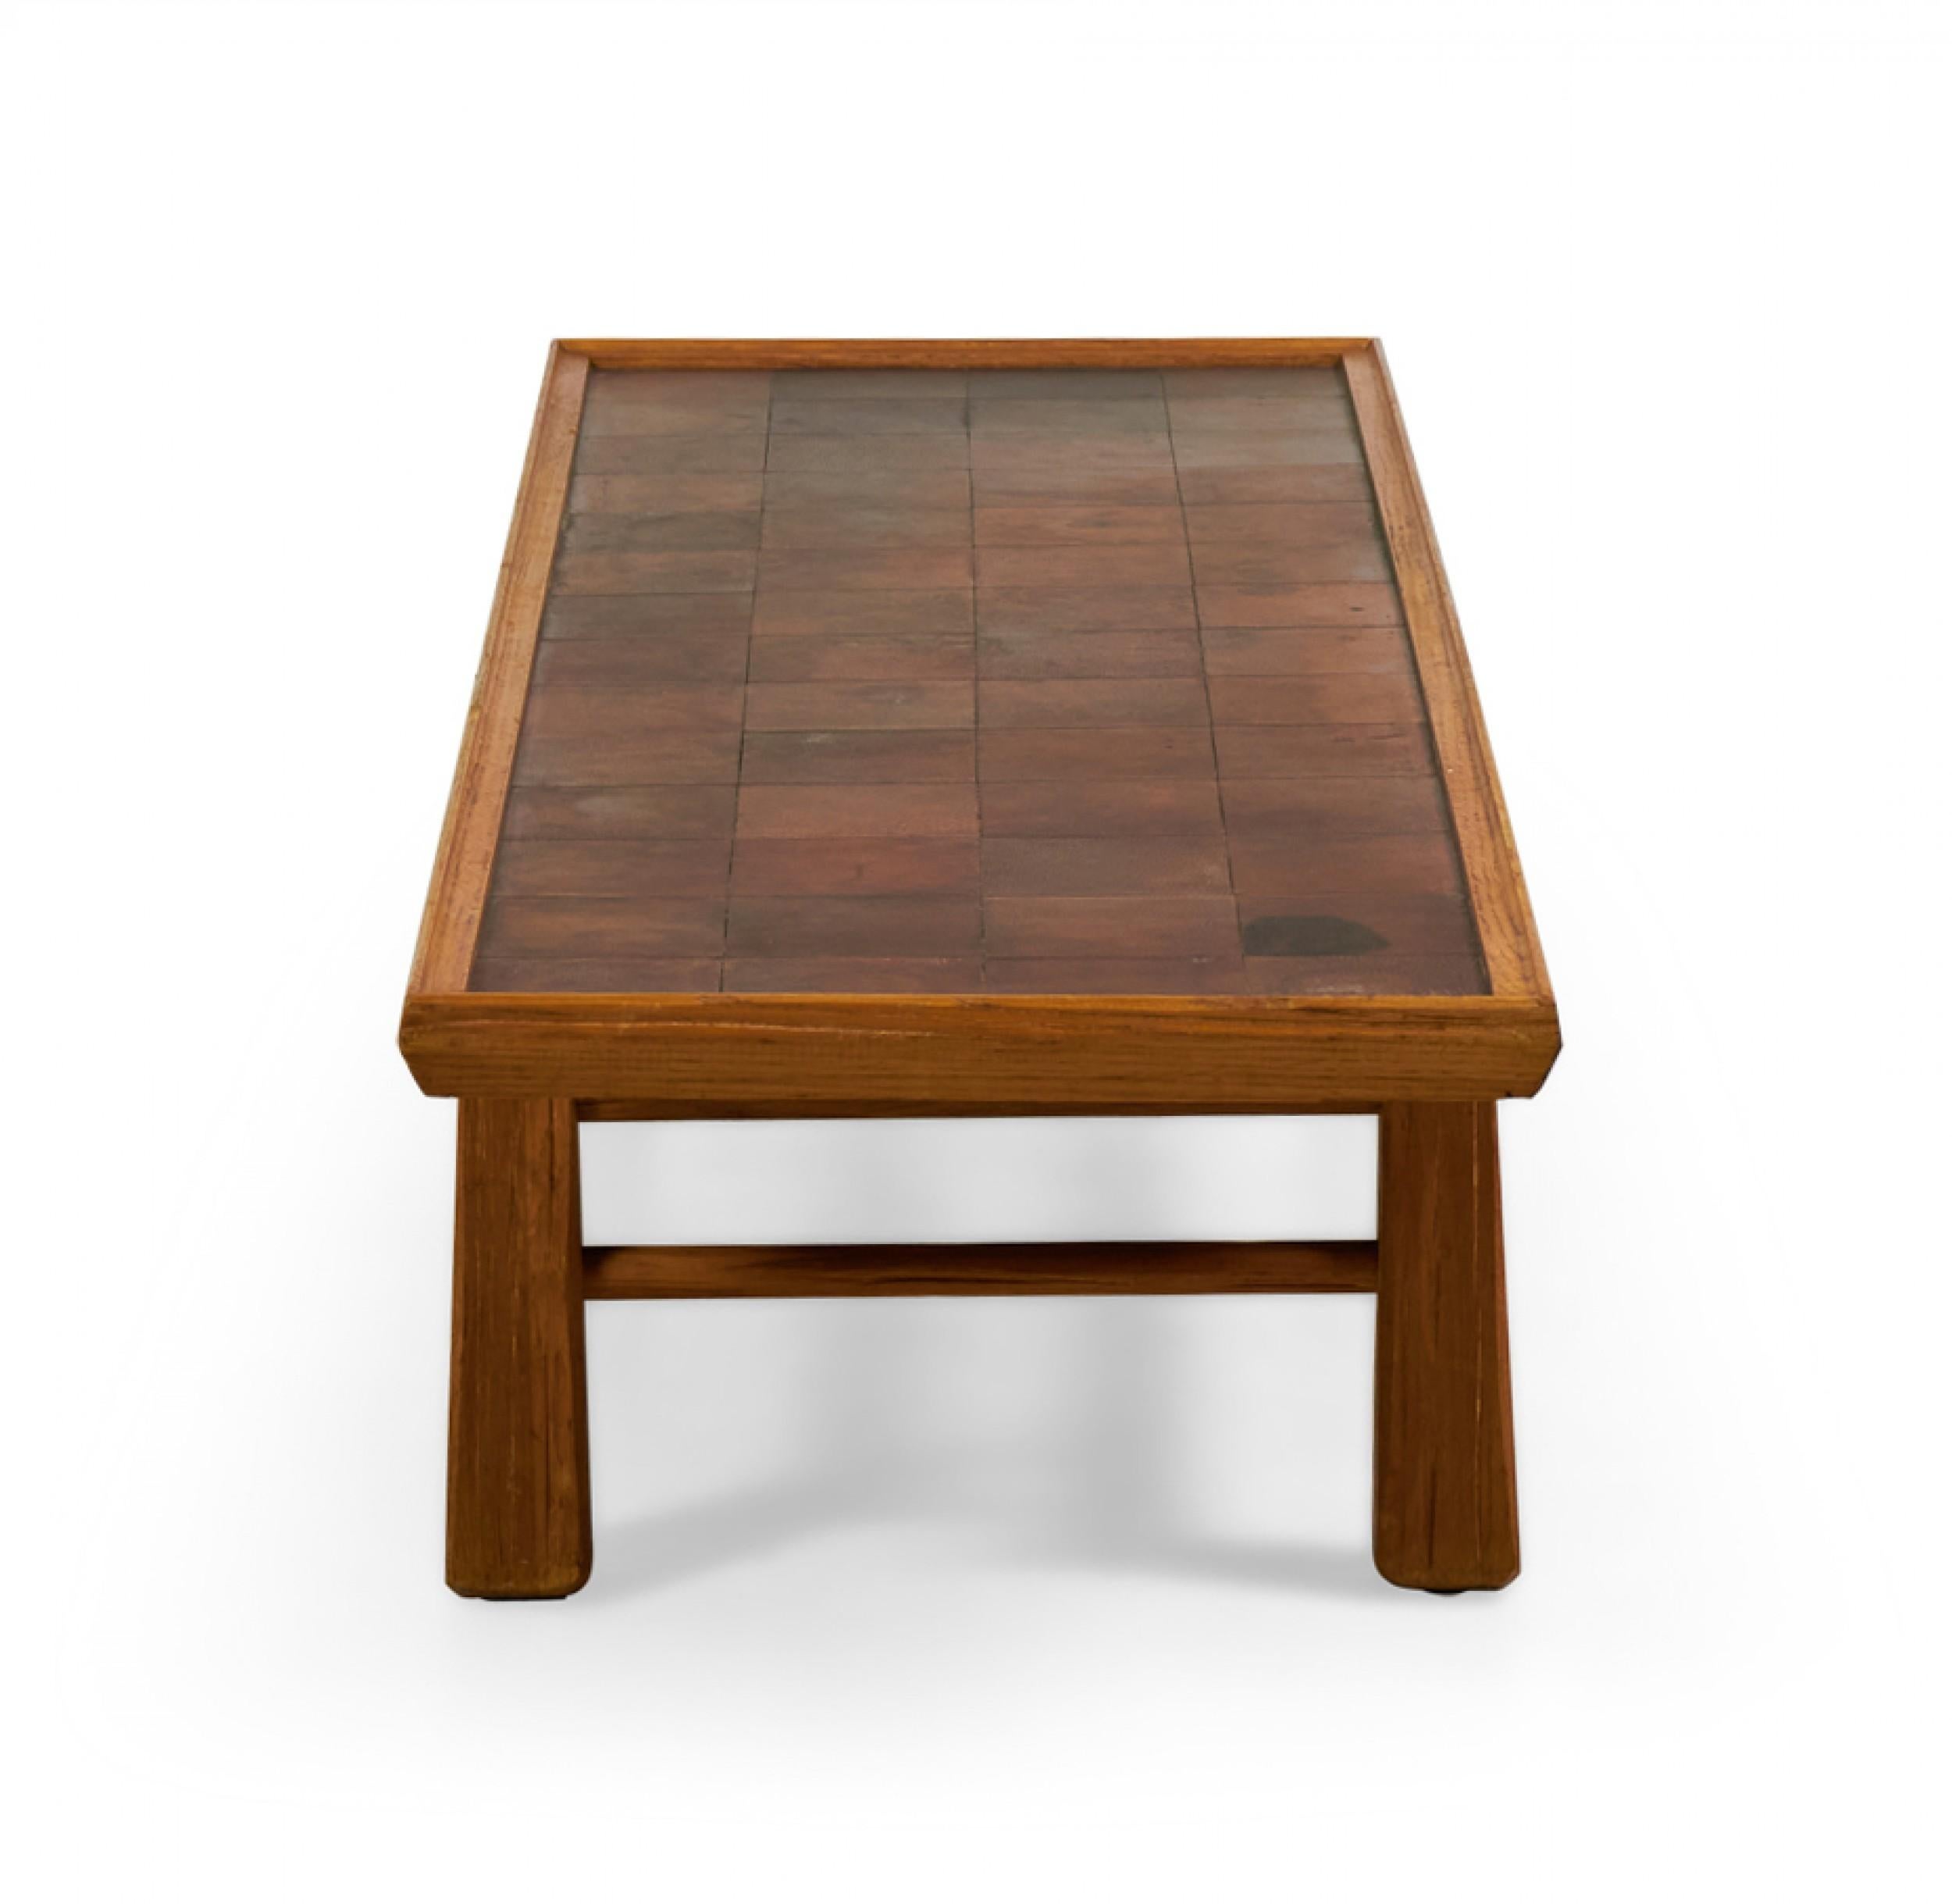 American Mid-Century Rustic (circa 1950) rectangular oak coffee table with a brown leather patchwork tabletop resting on four rustic legs with a stretcher base. (BRANDT RANCH, TEXAS)